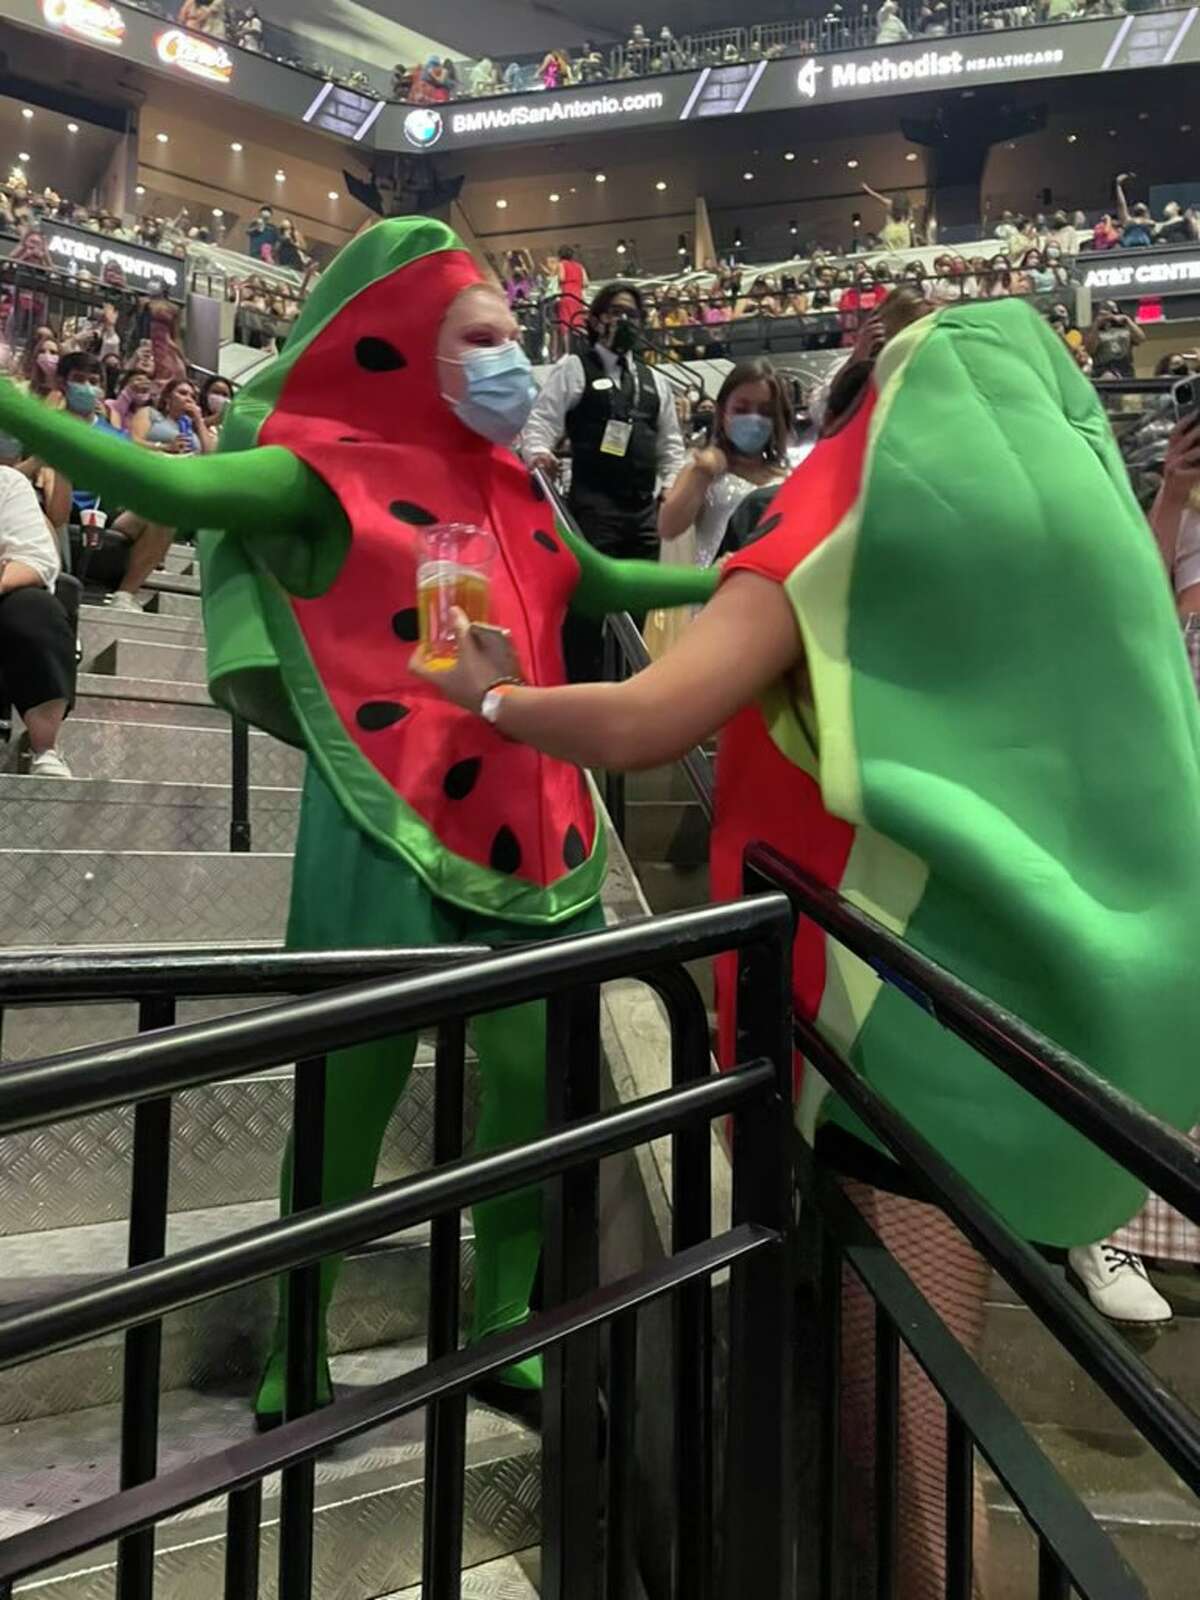 Moment of happiness': Harry Styles fans dressed as watermelons have chance  encounter at AT&T Center